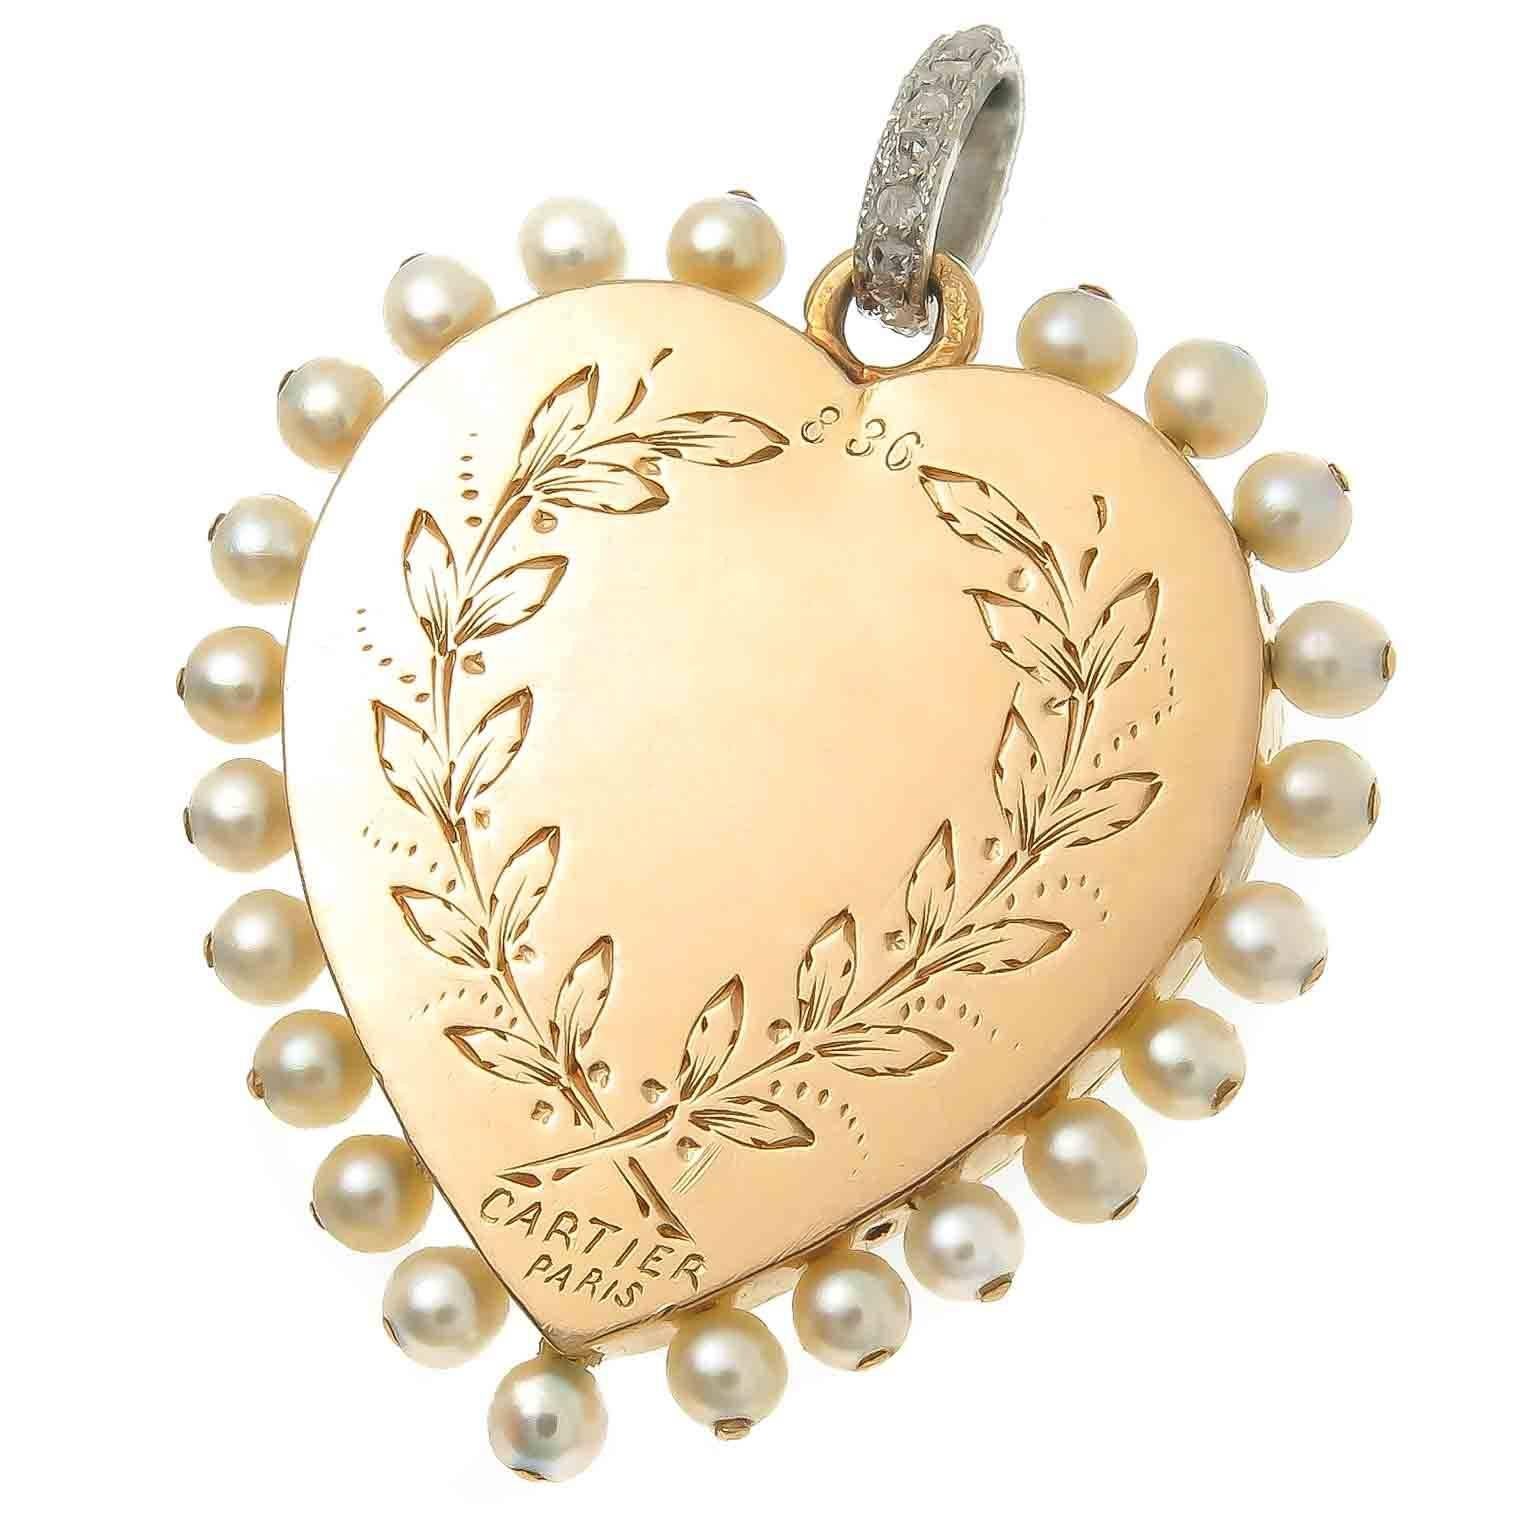 Circa 1910 Cartier Gold and Platinum Heart Pendant in the Belle Epoque style, measuring 1 X 1 inch and being 1/8 inch thick. Finished in a Bright Green Guilloche Enamel and surrounded by White Enamel. Rose cut Diamonds and 2 MM Natural pearls.